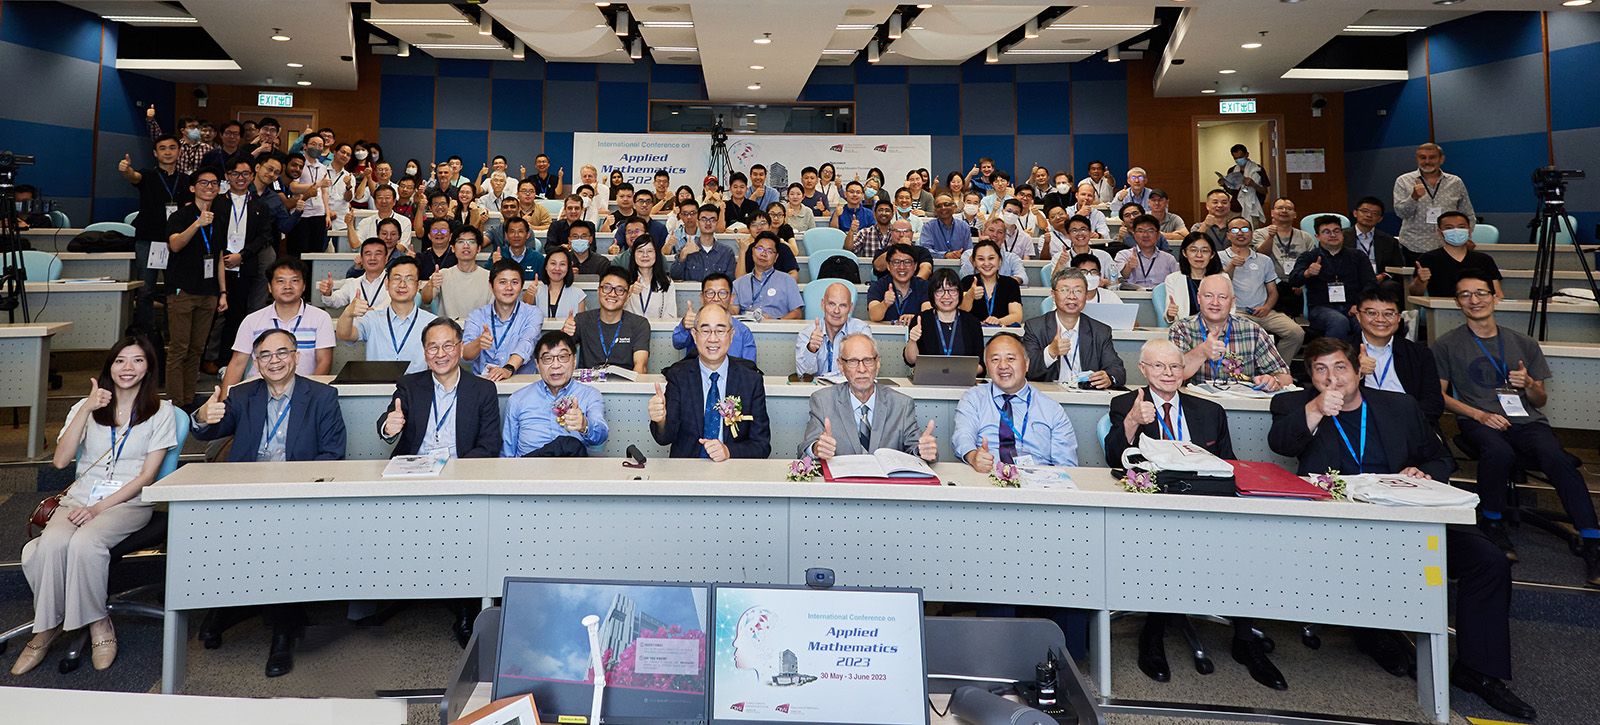 Participants at the International Conference on Applied Mathematics 2023